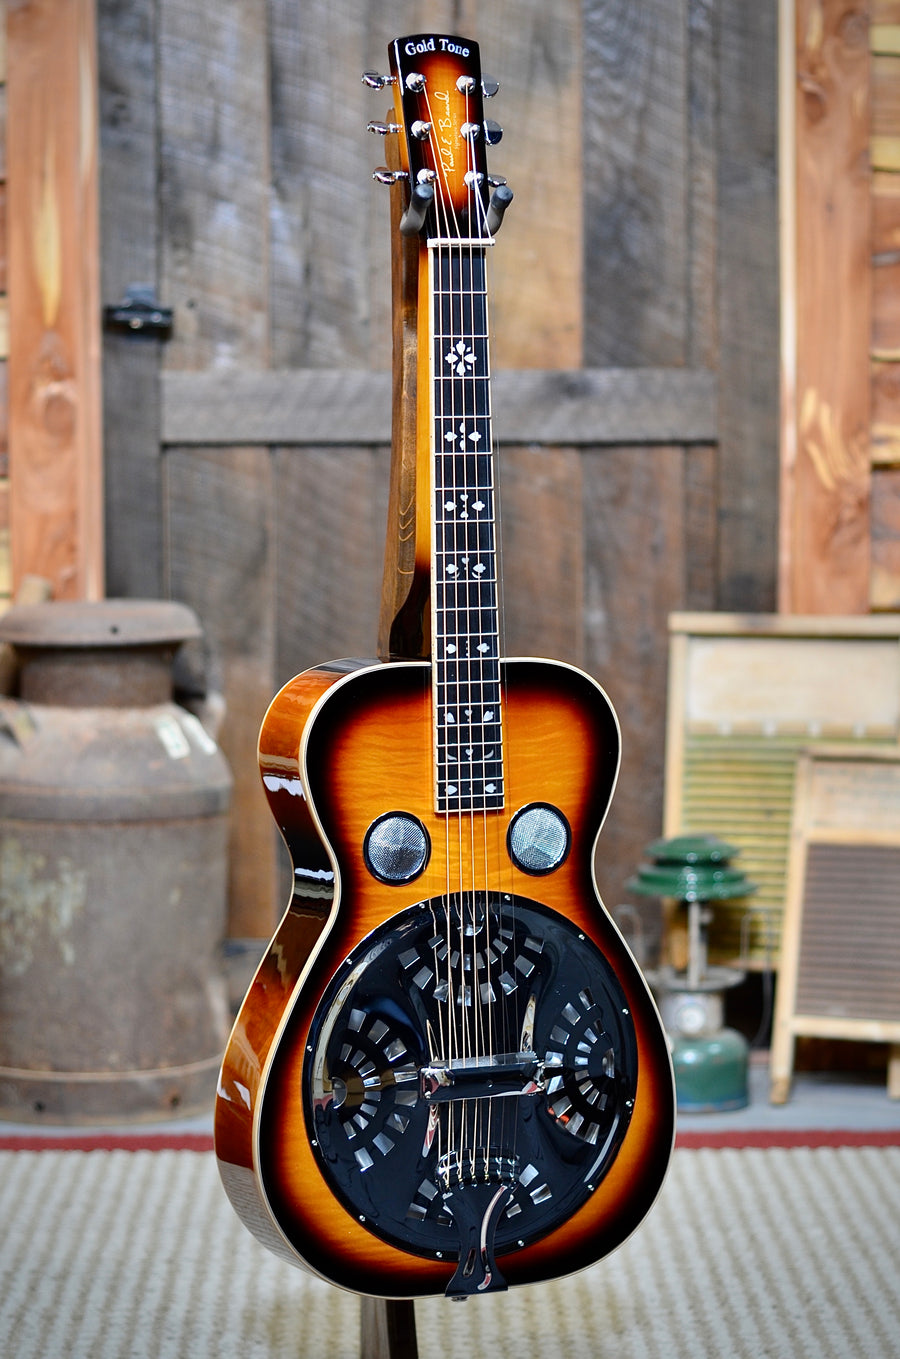 Gold Tone PBS-D Paul Beard Deluxe Signature-Series Squareneck Resonator Guitar Deluxe with Case